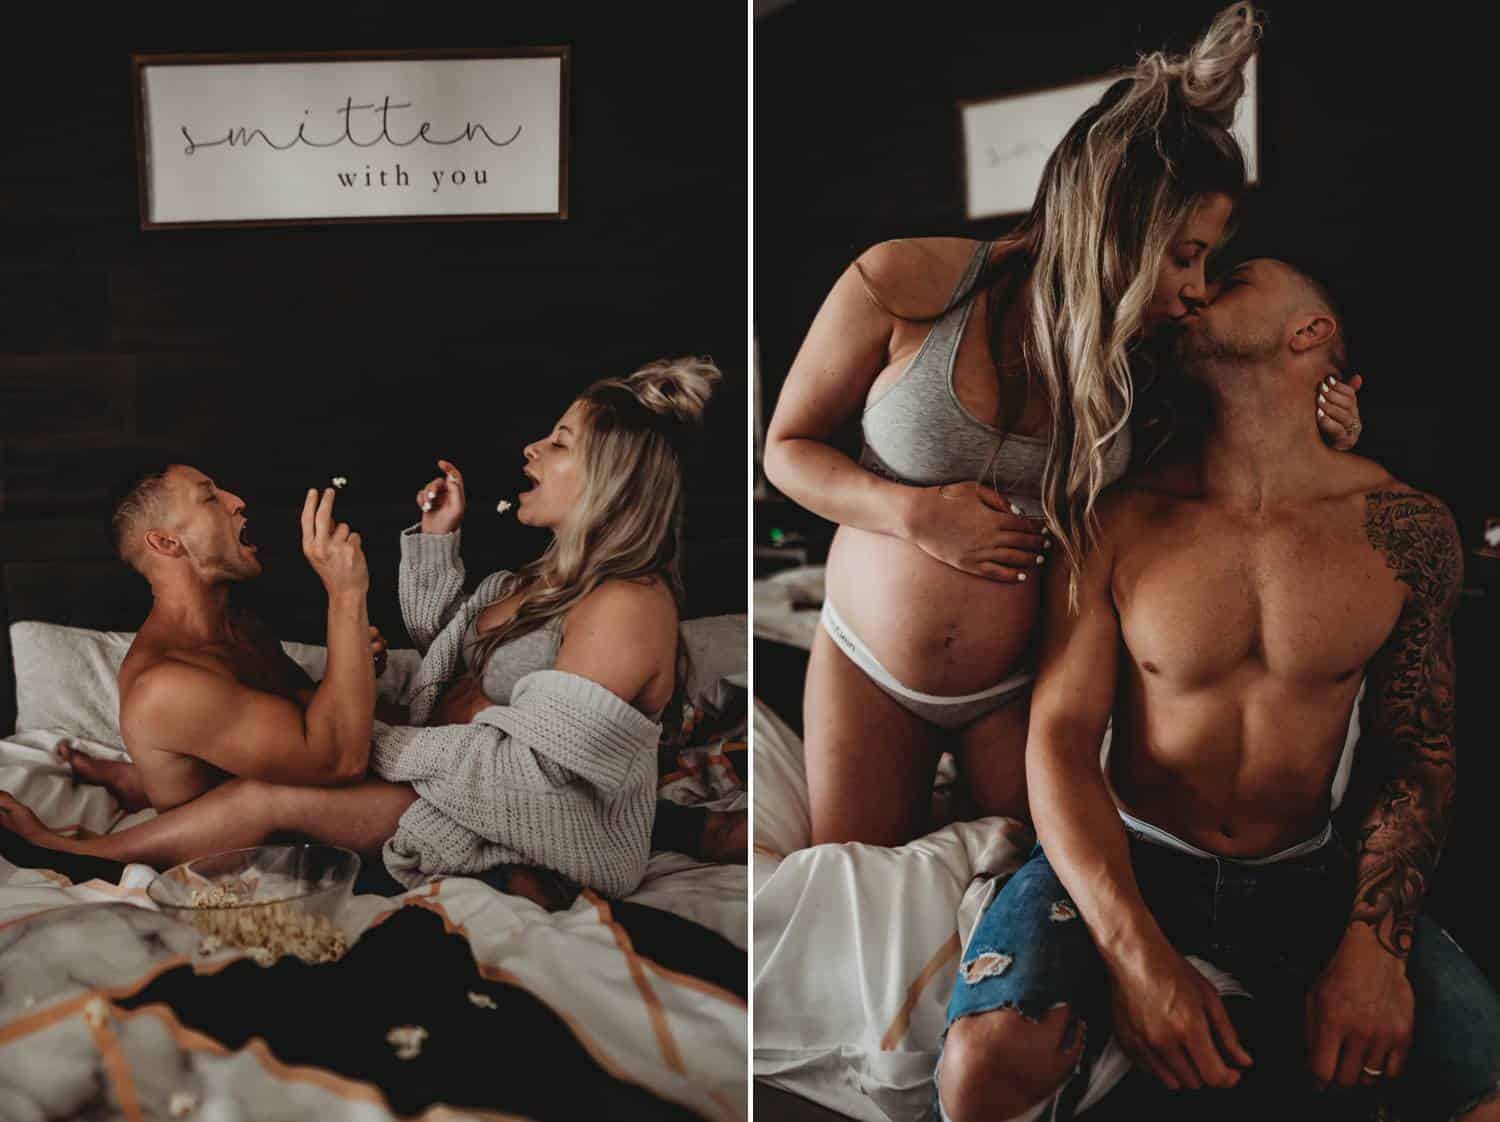 A sign that reads "Smitten with you" hangs above the bed where a couple sits, tossing popcorn into one another's mouths before kissing lightly.